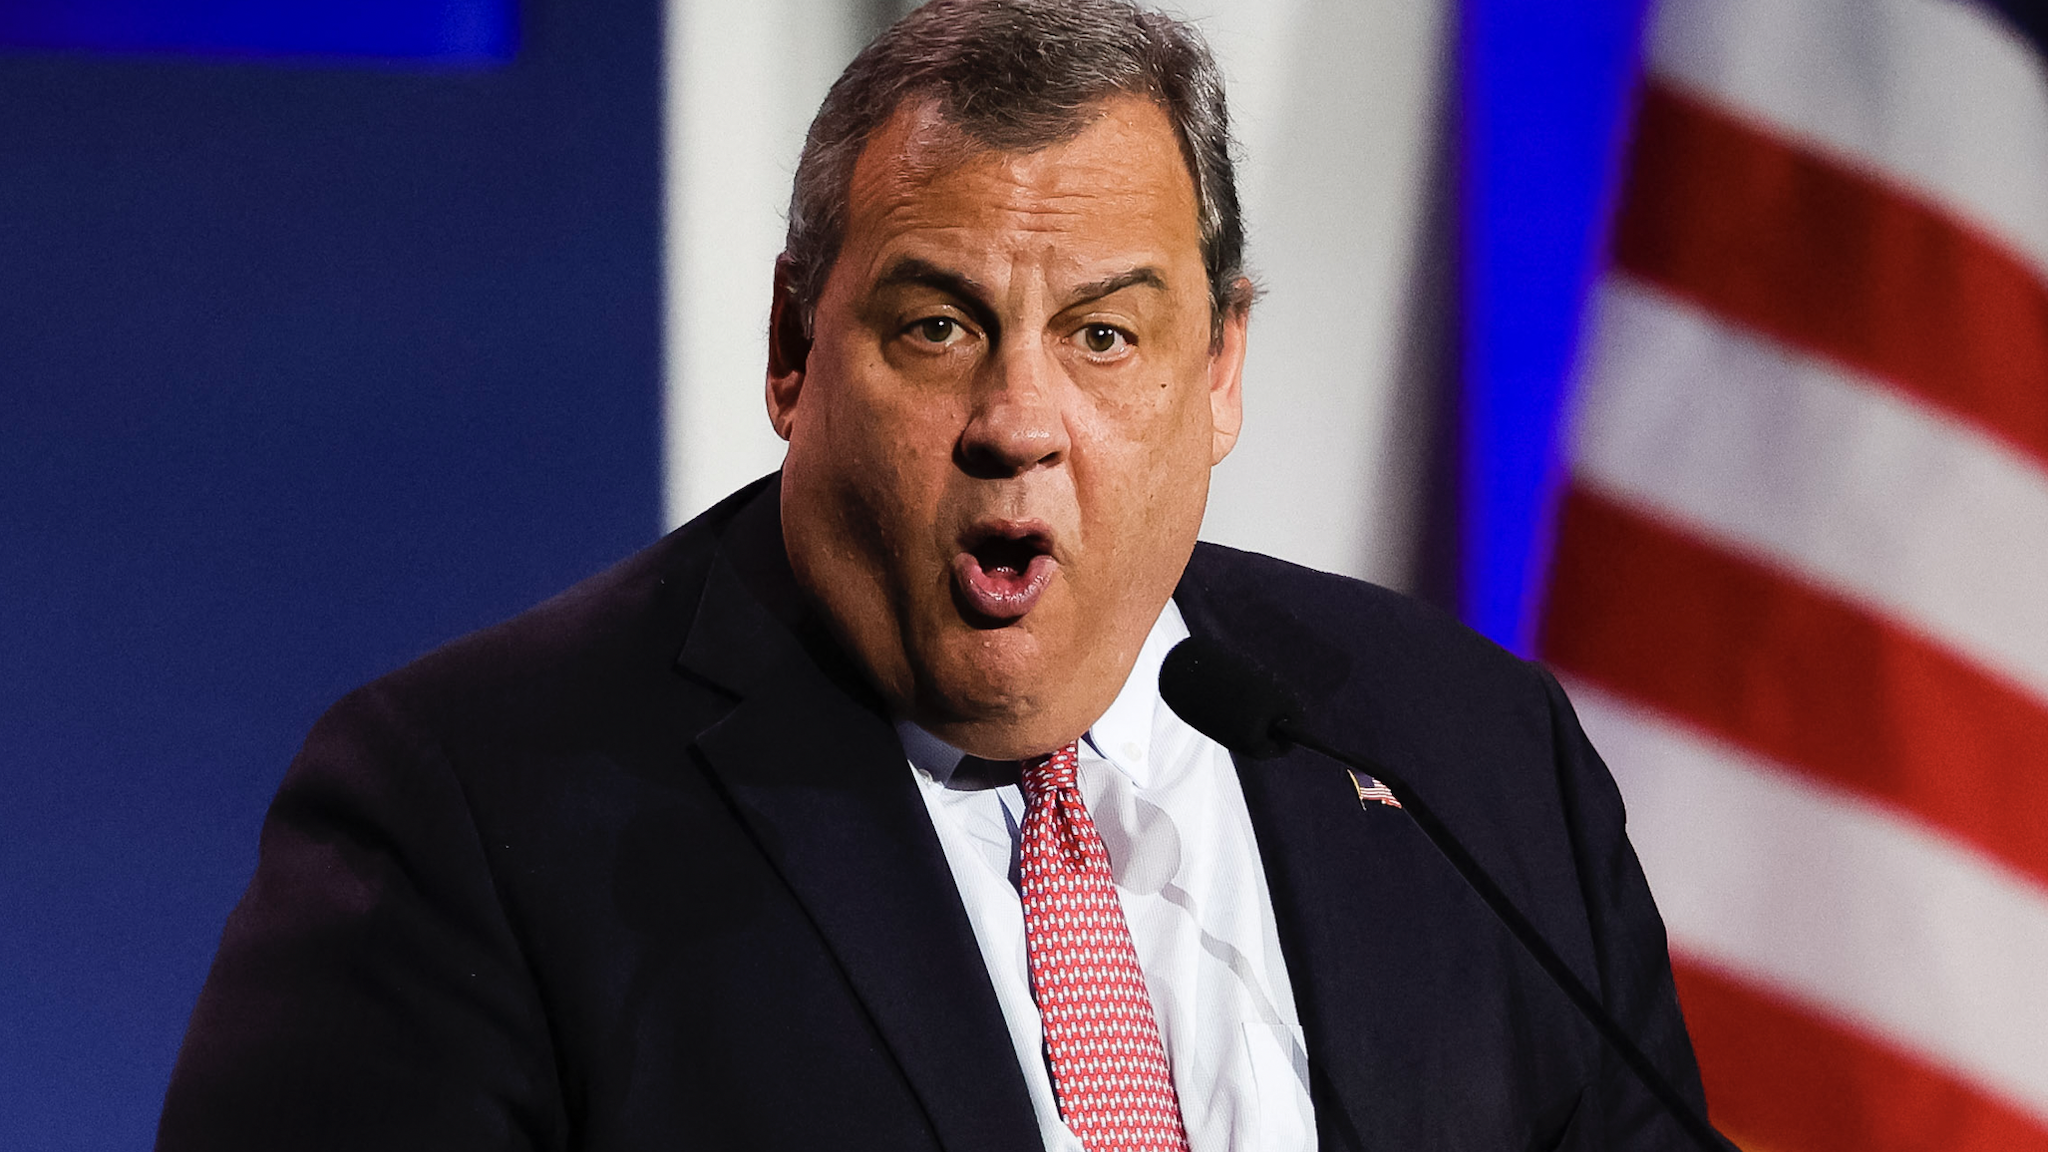 Former Governor of New Jersey Chris Christie speaks at the Republican Jewish Coalition Annual Leadership Meeting in Las Vegas, Nevada, on November 19, 2022.